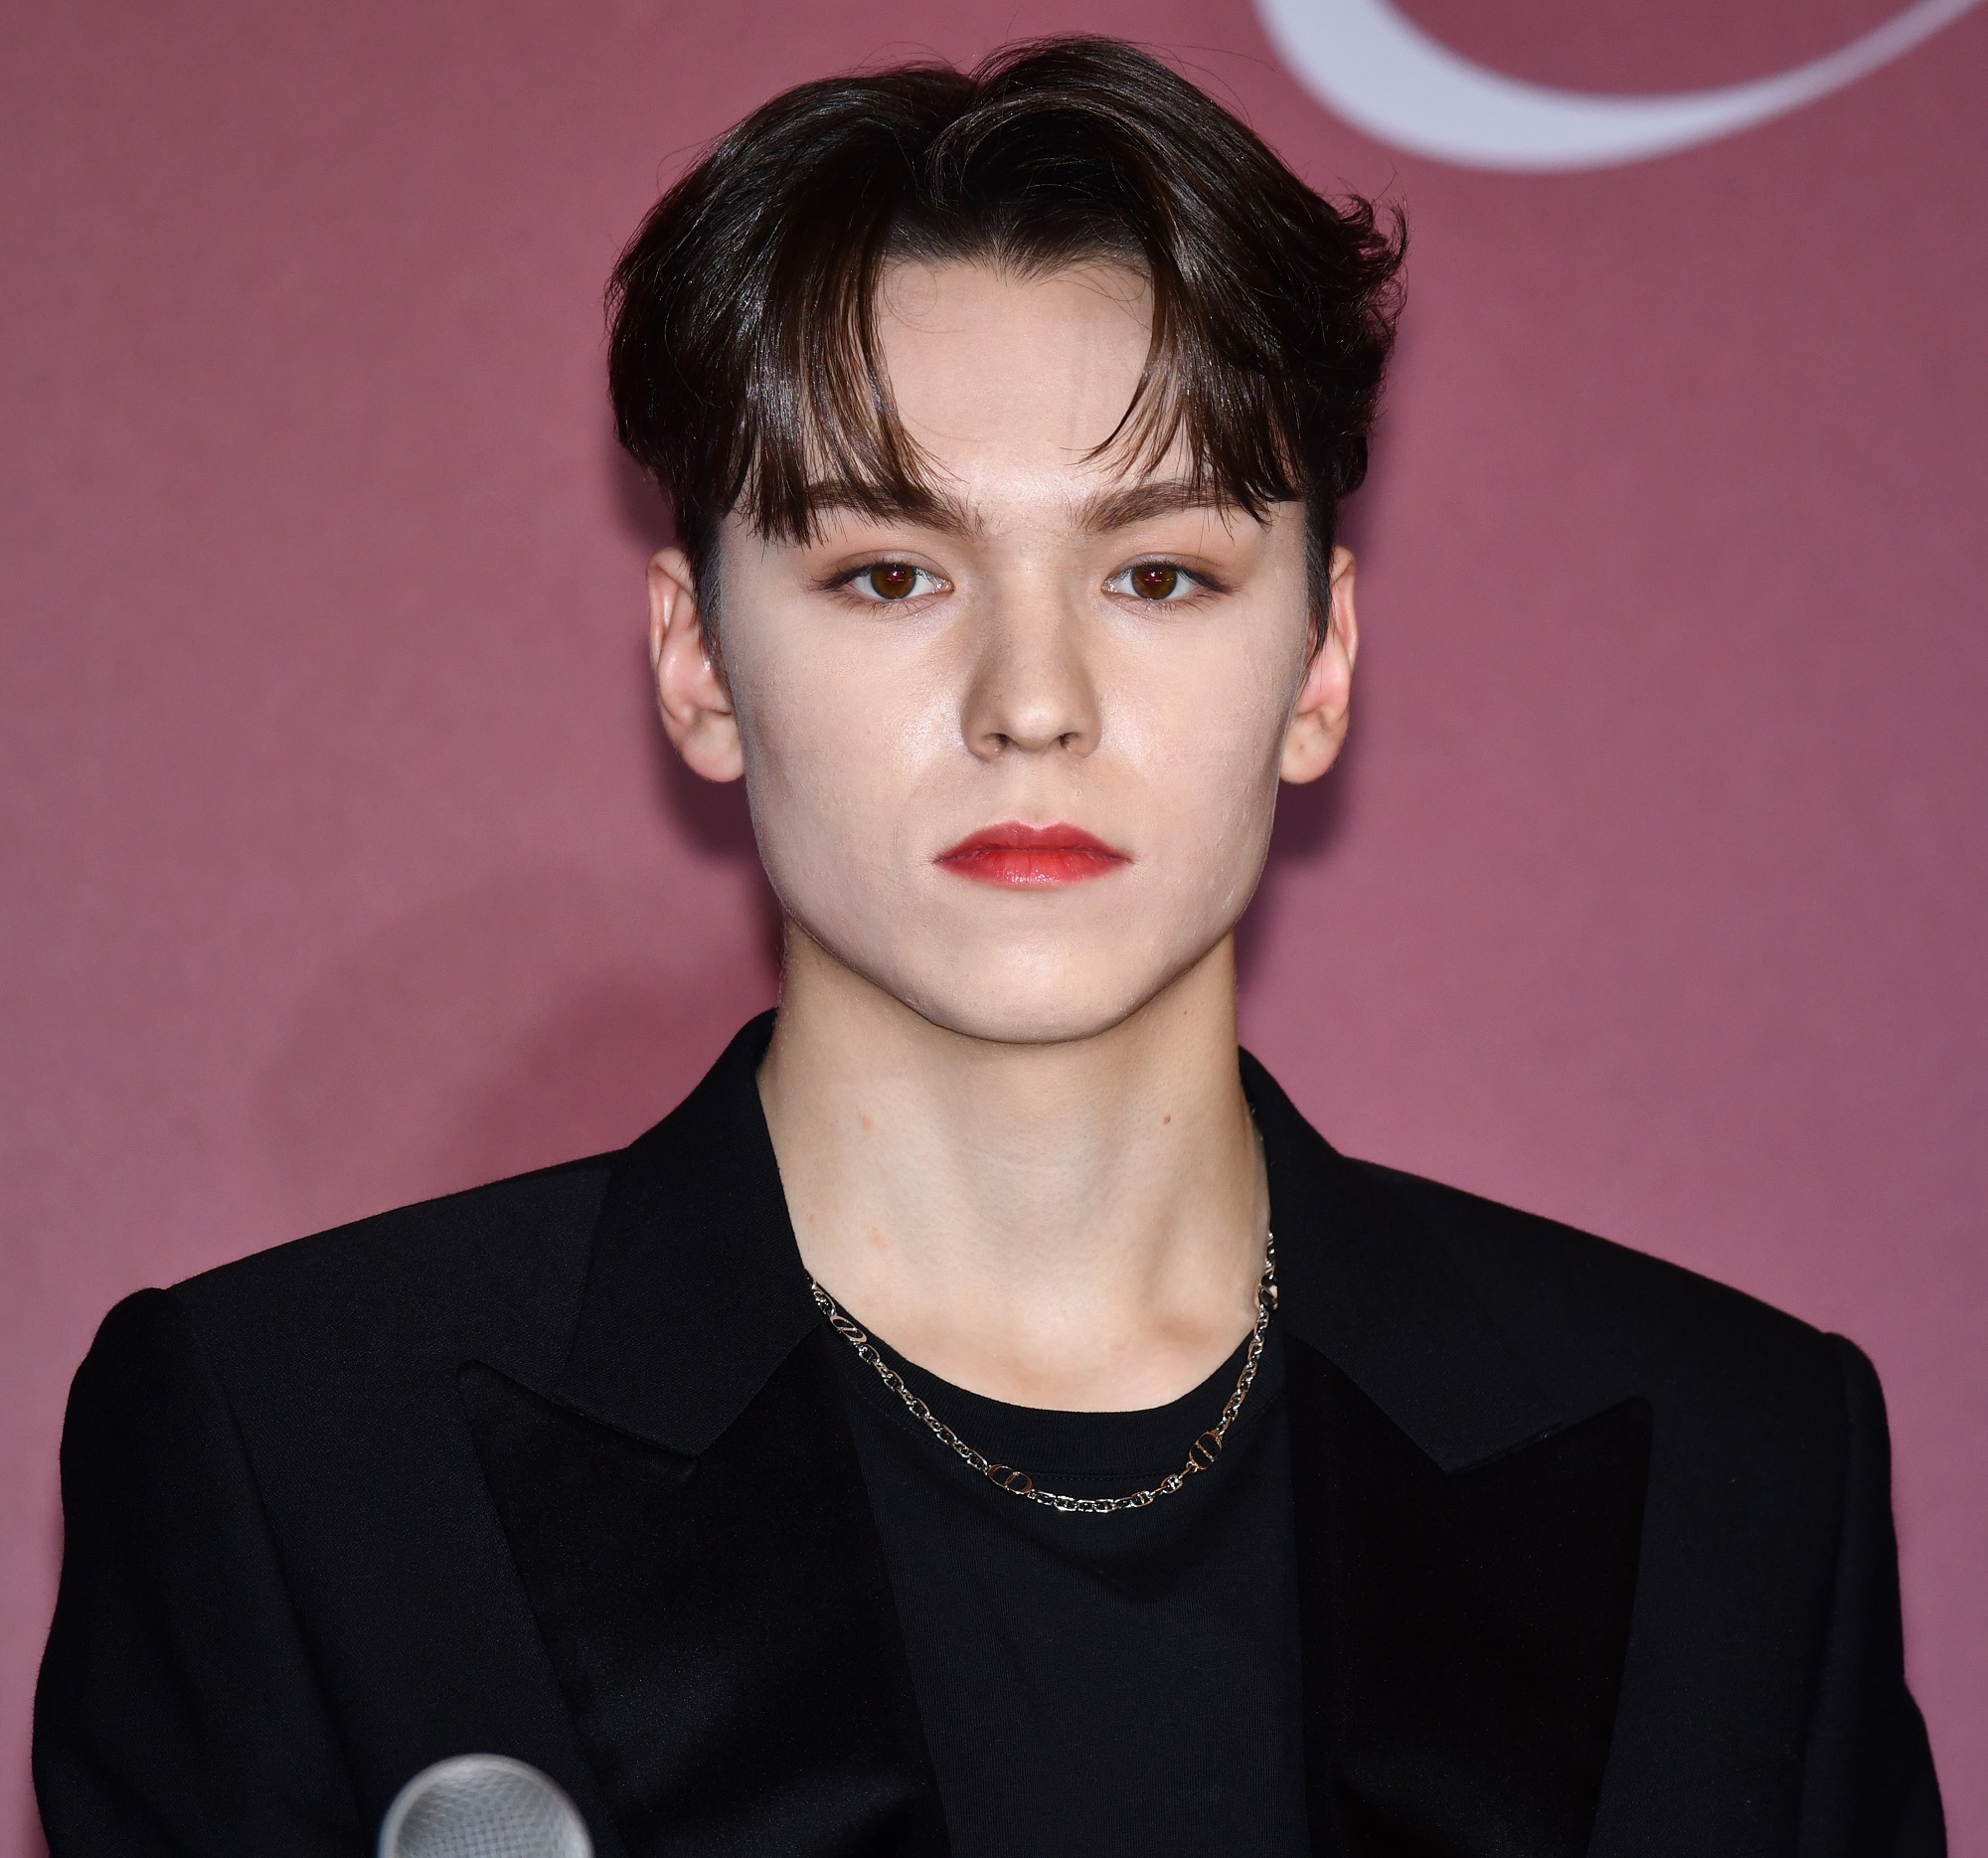 Vernon of Seventeen at the media showcase for the band's album 'Attacca'